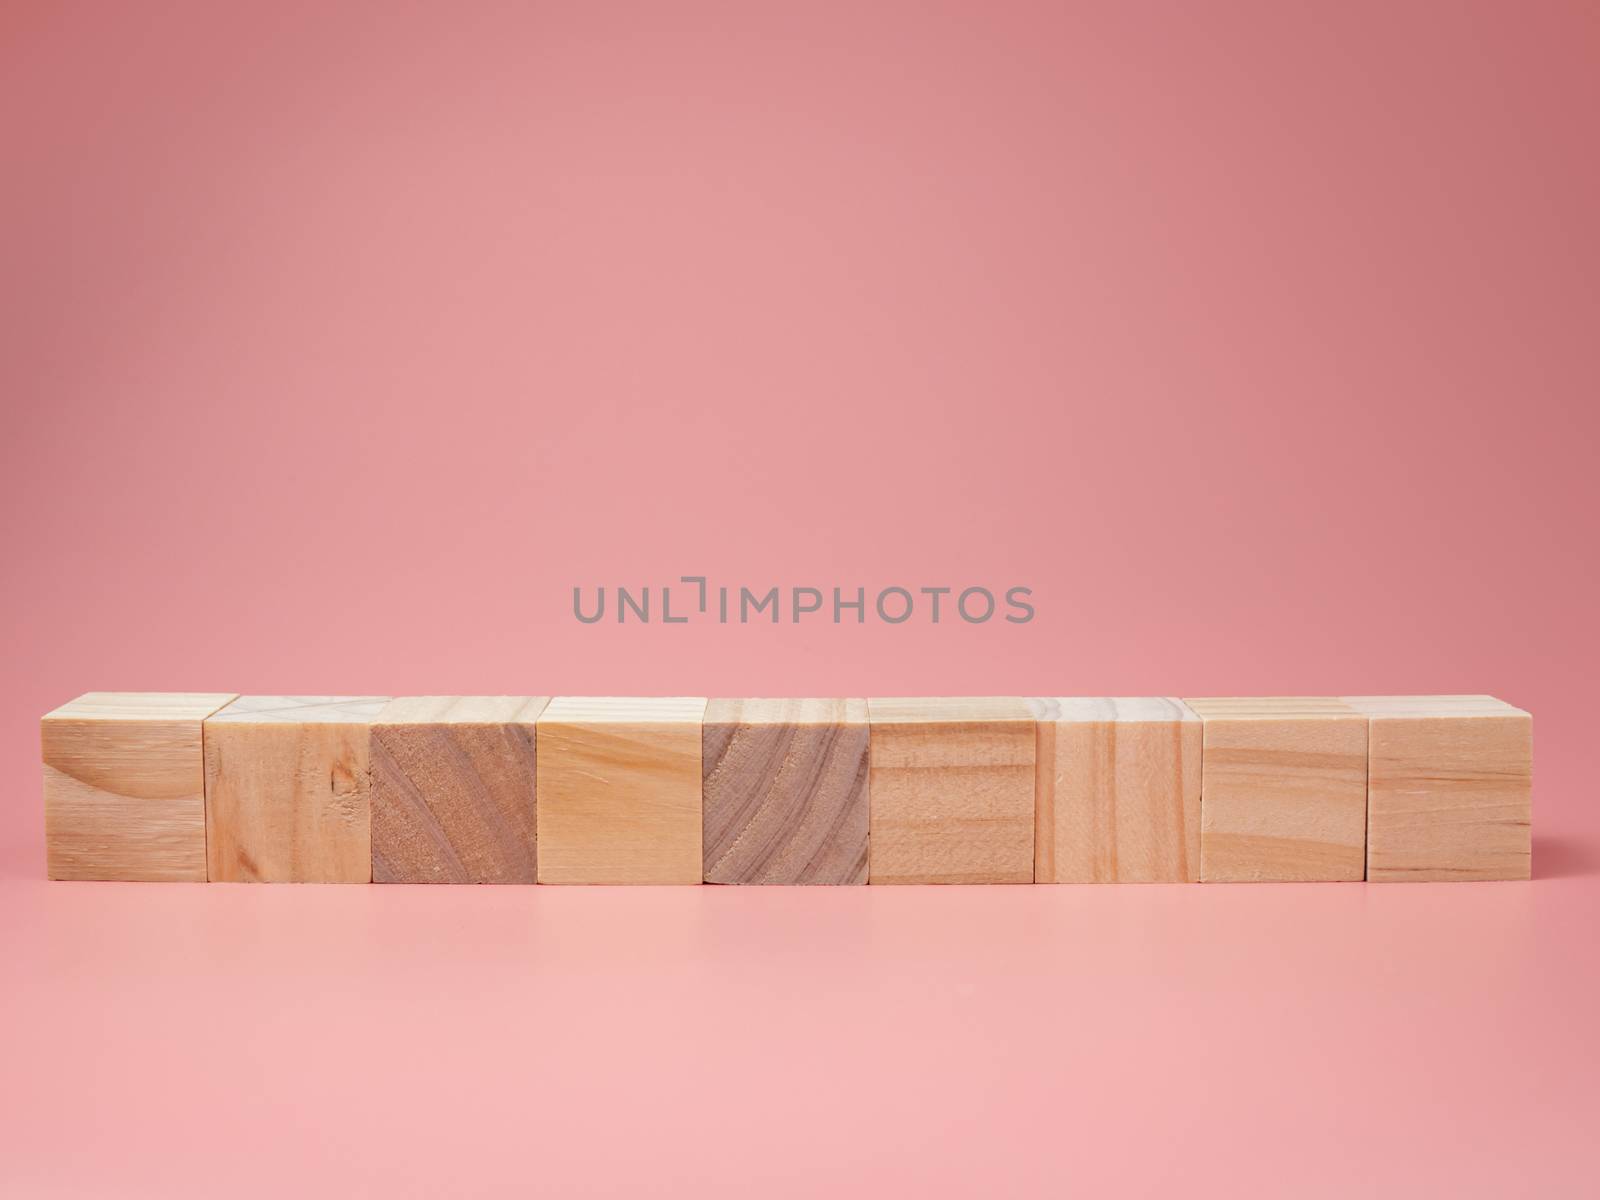 An empty wooden cube lined up on a pink background. For new ideas to be put into the picture.